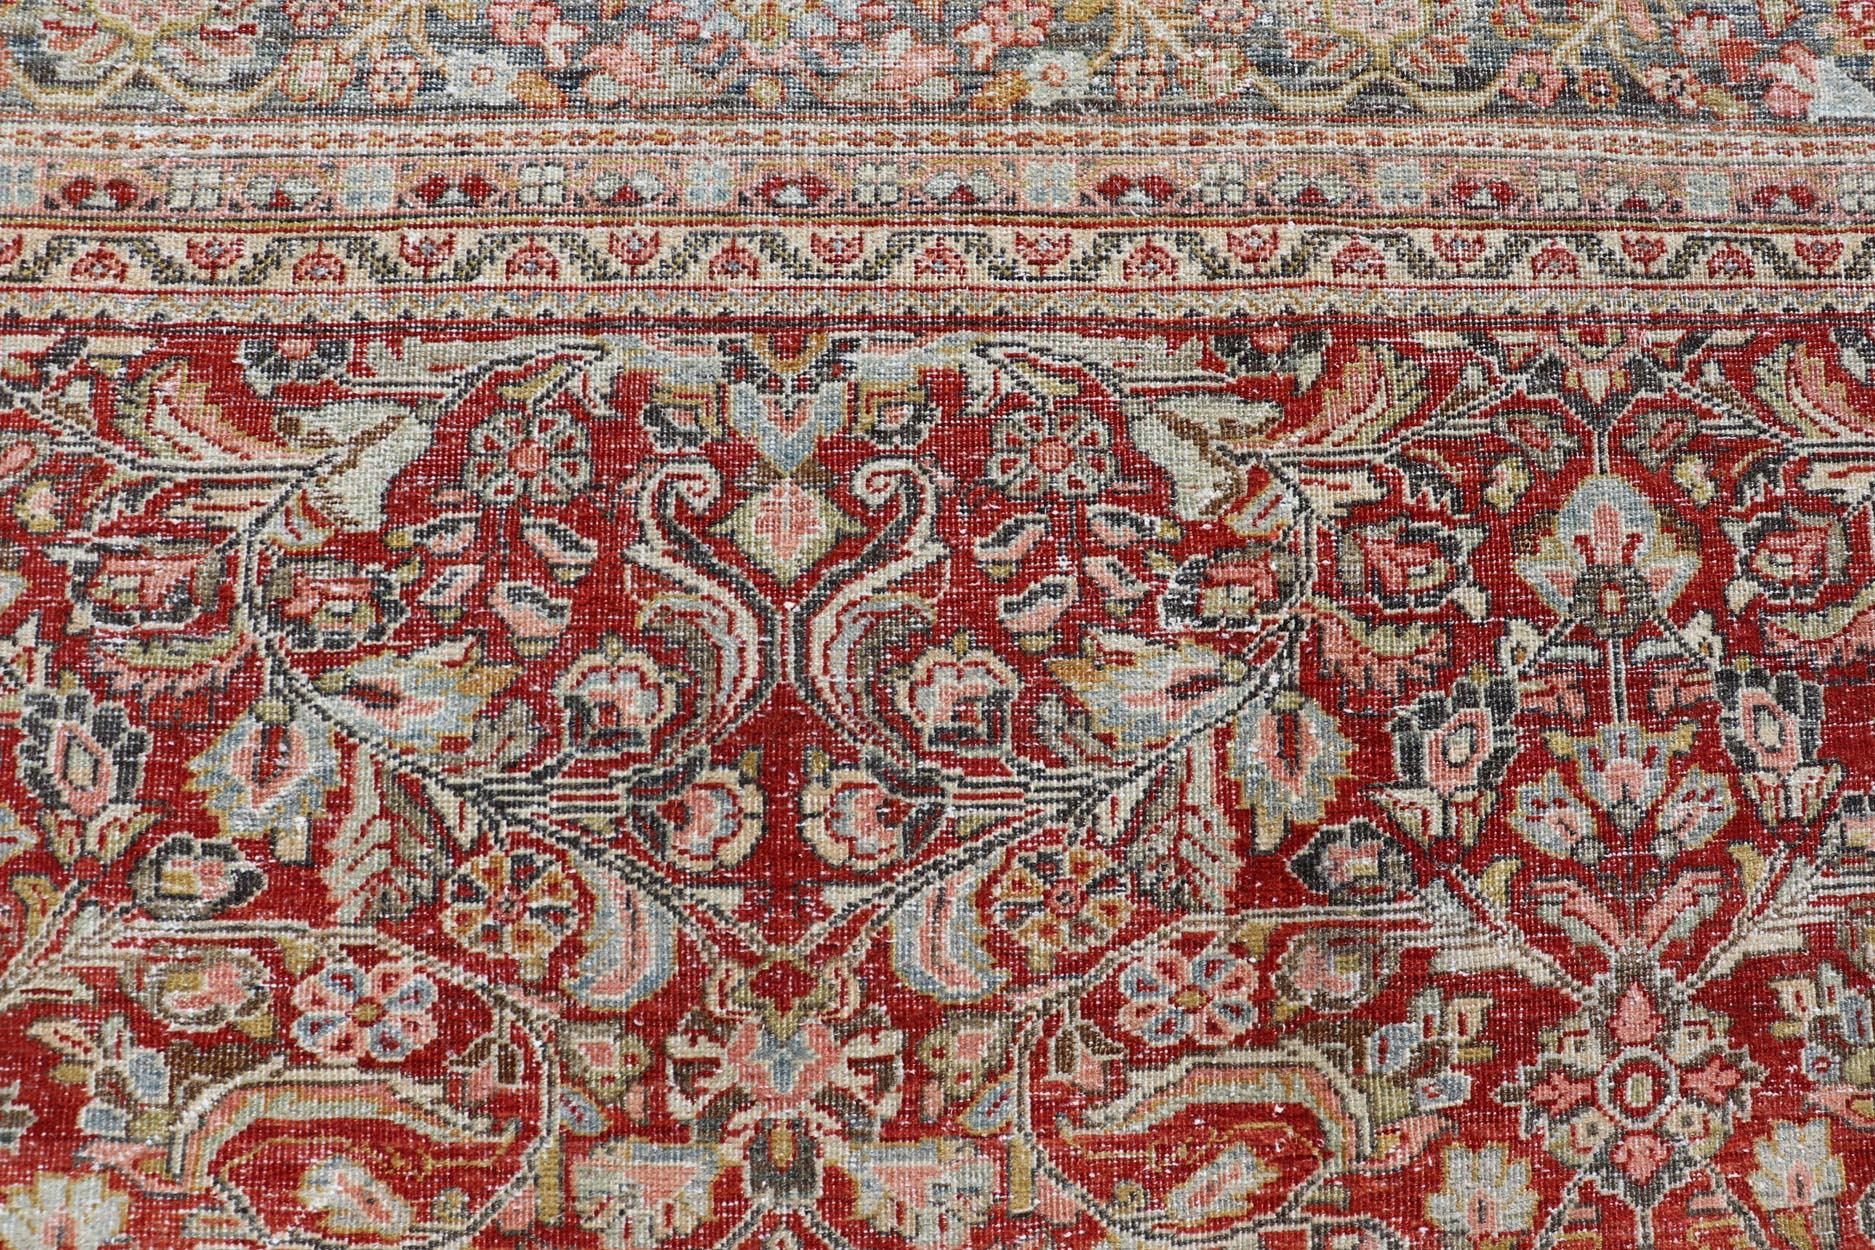 Antique large Persian colorful Sultanabad Mahal rug with all over floral design. Antique Mahal Sultanabad. Keivan Woven Arts; rug W22-0403, country of origin / type: Iran / Mahal, circa 1930.
Measures: 10'10 x 17'8 
This 1930 colorful antique